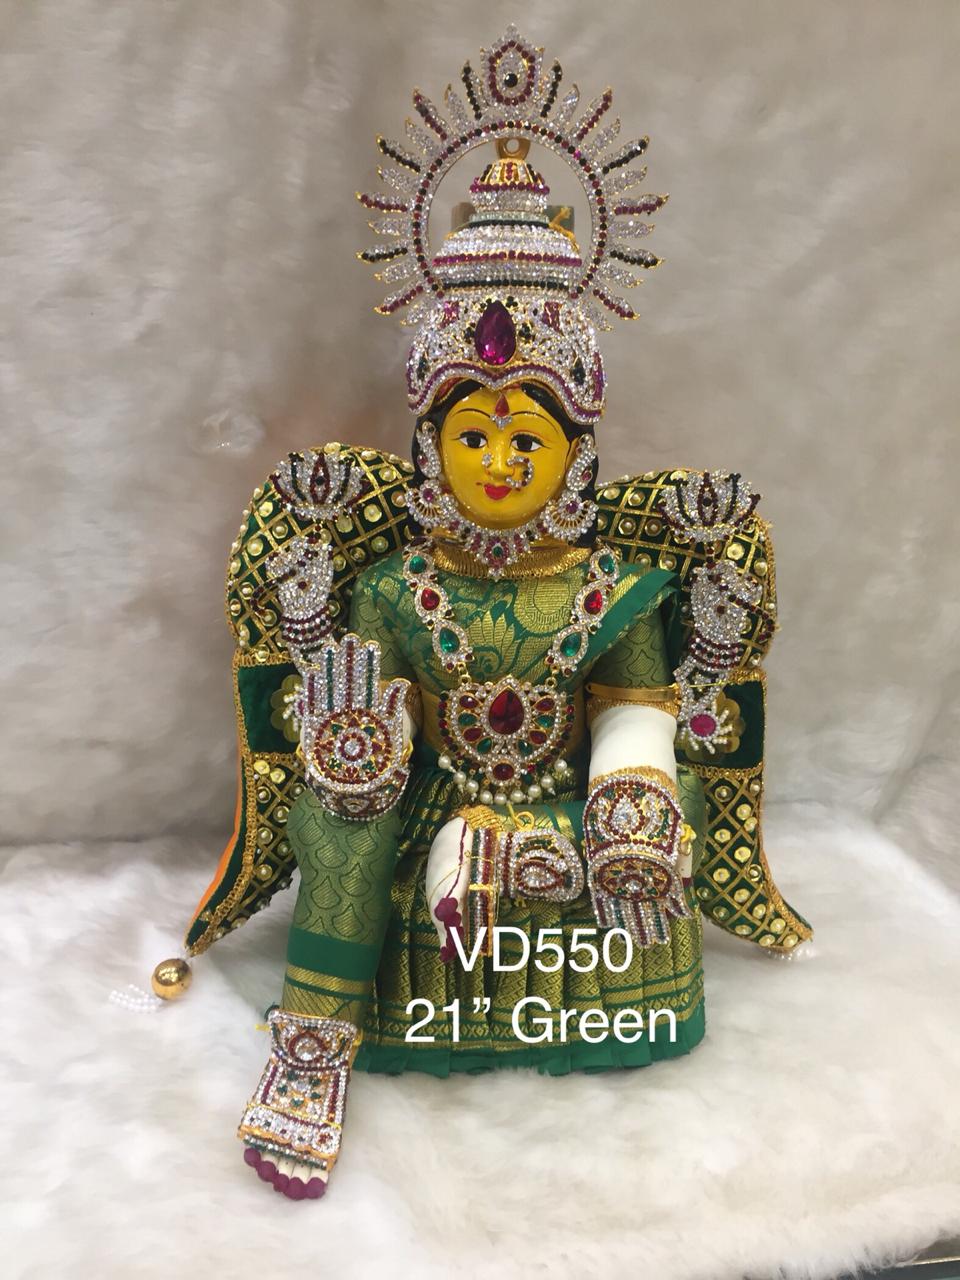 Goddess Varalakshmi idol with a golden crown surrounded by lotus flowers, representing wealth and prosperity for Varalakshmi Vratham festival.